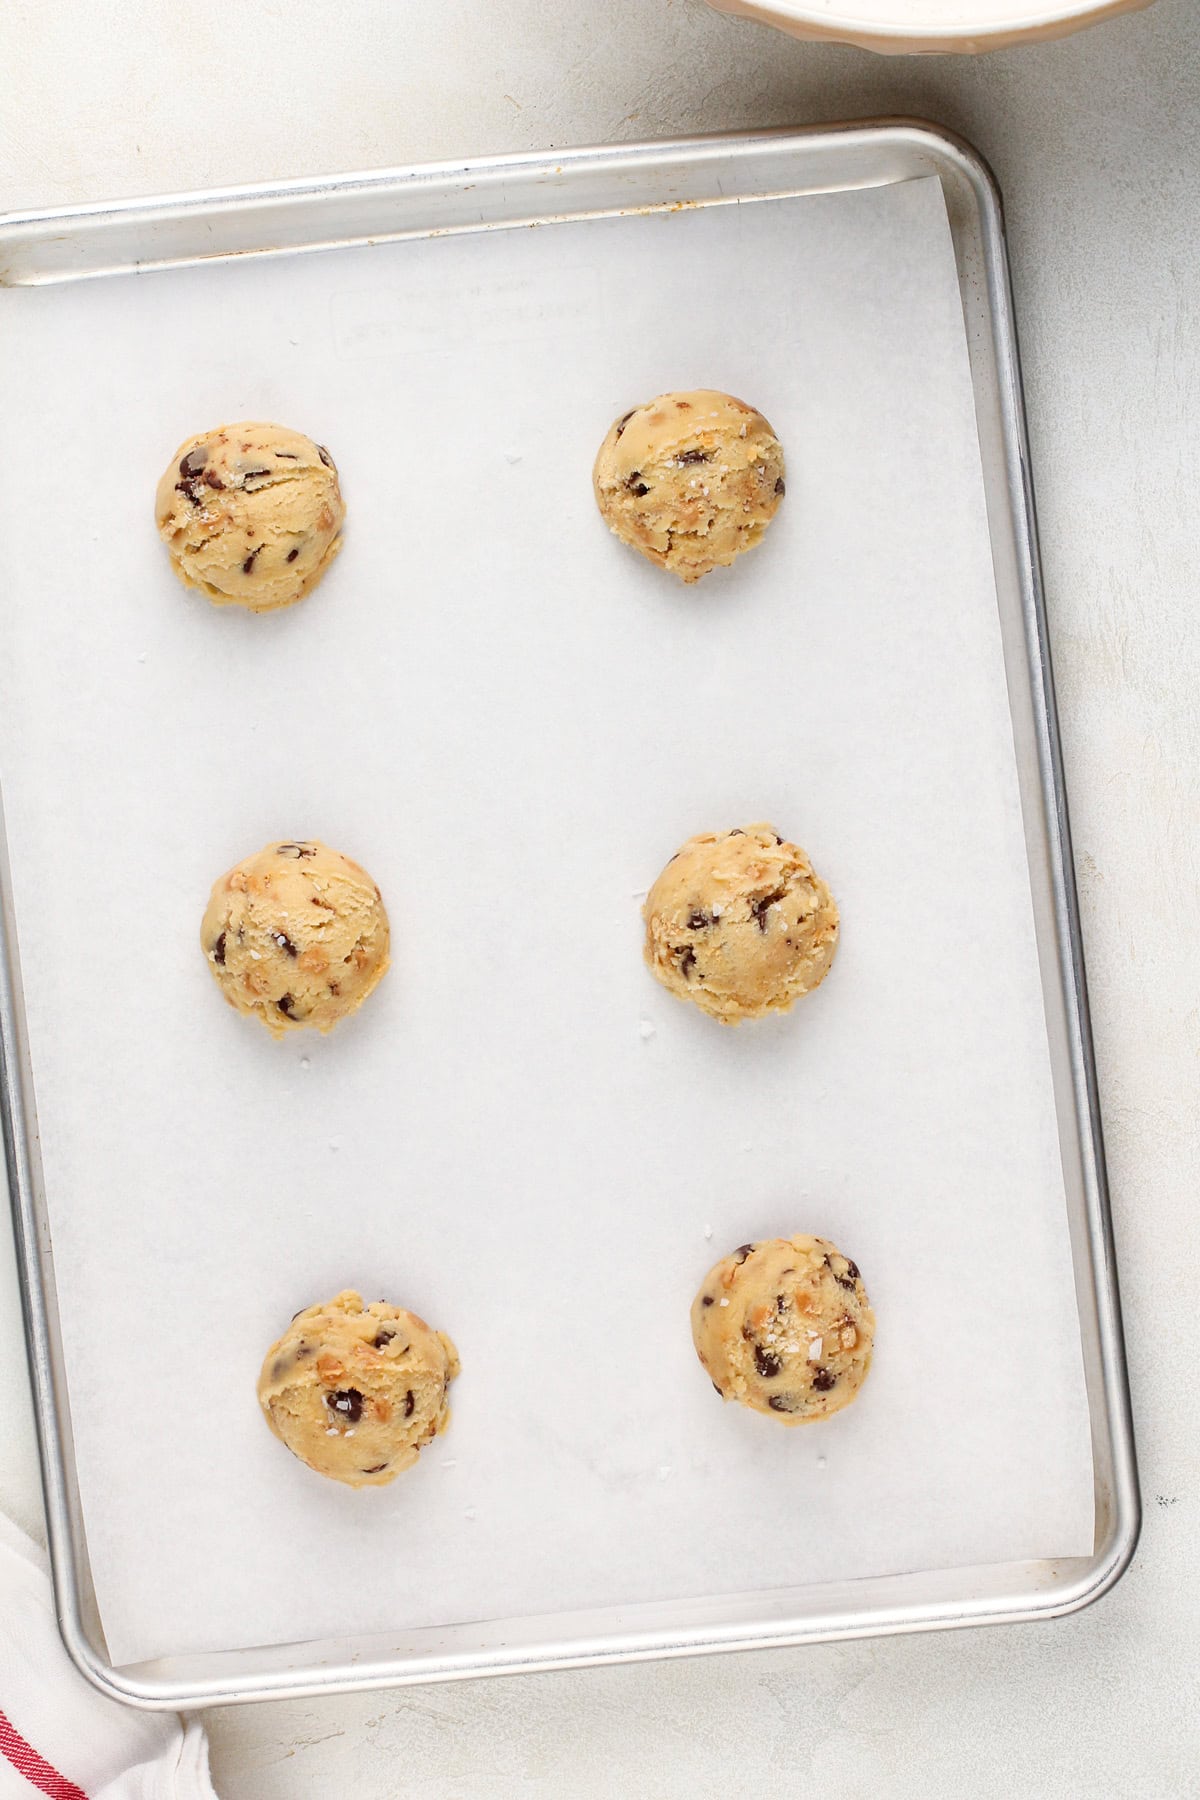 6 balls of salted caramel chocolate chip cookie dough on a lined baking sheet, ready to be baked.